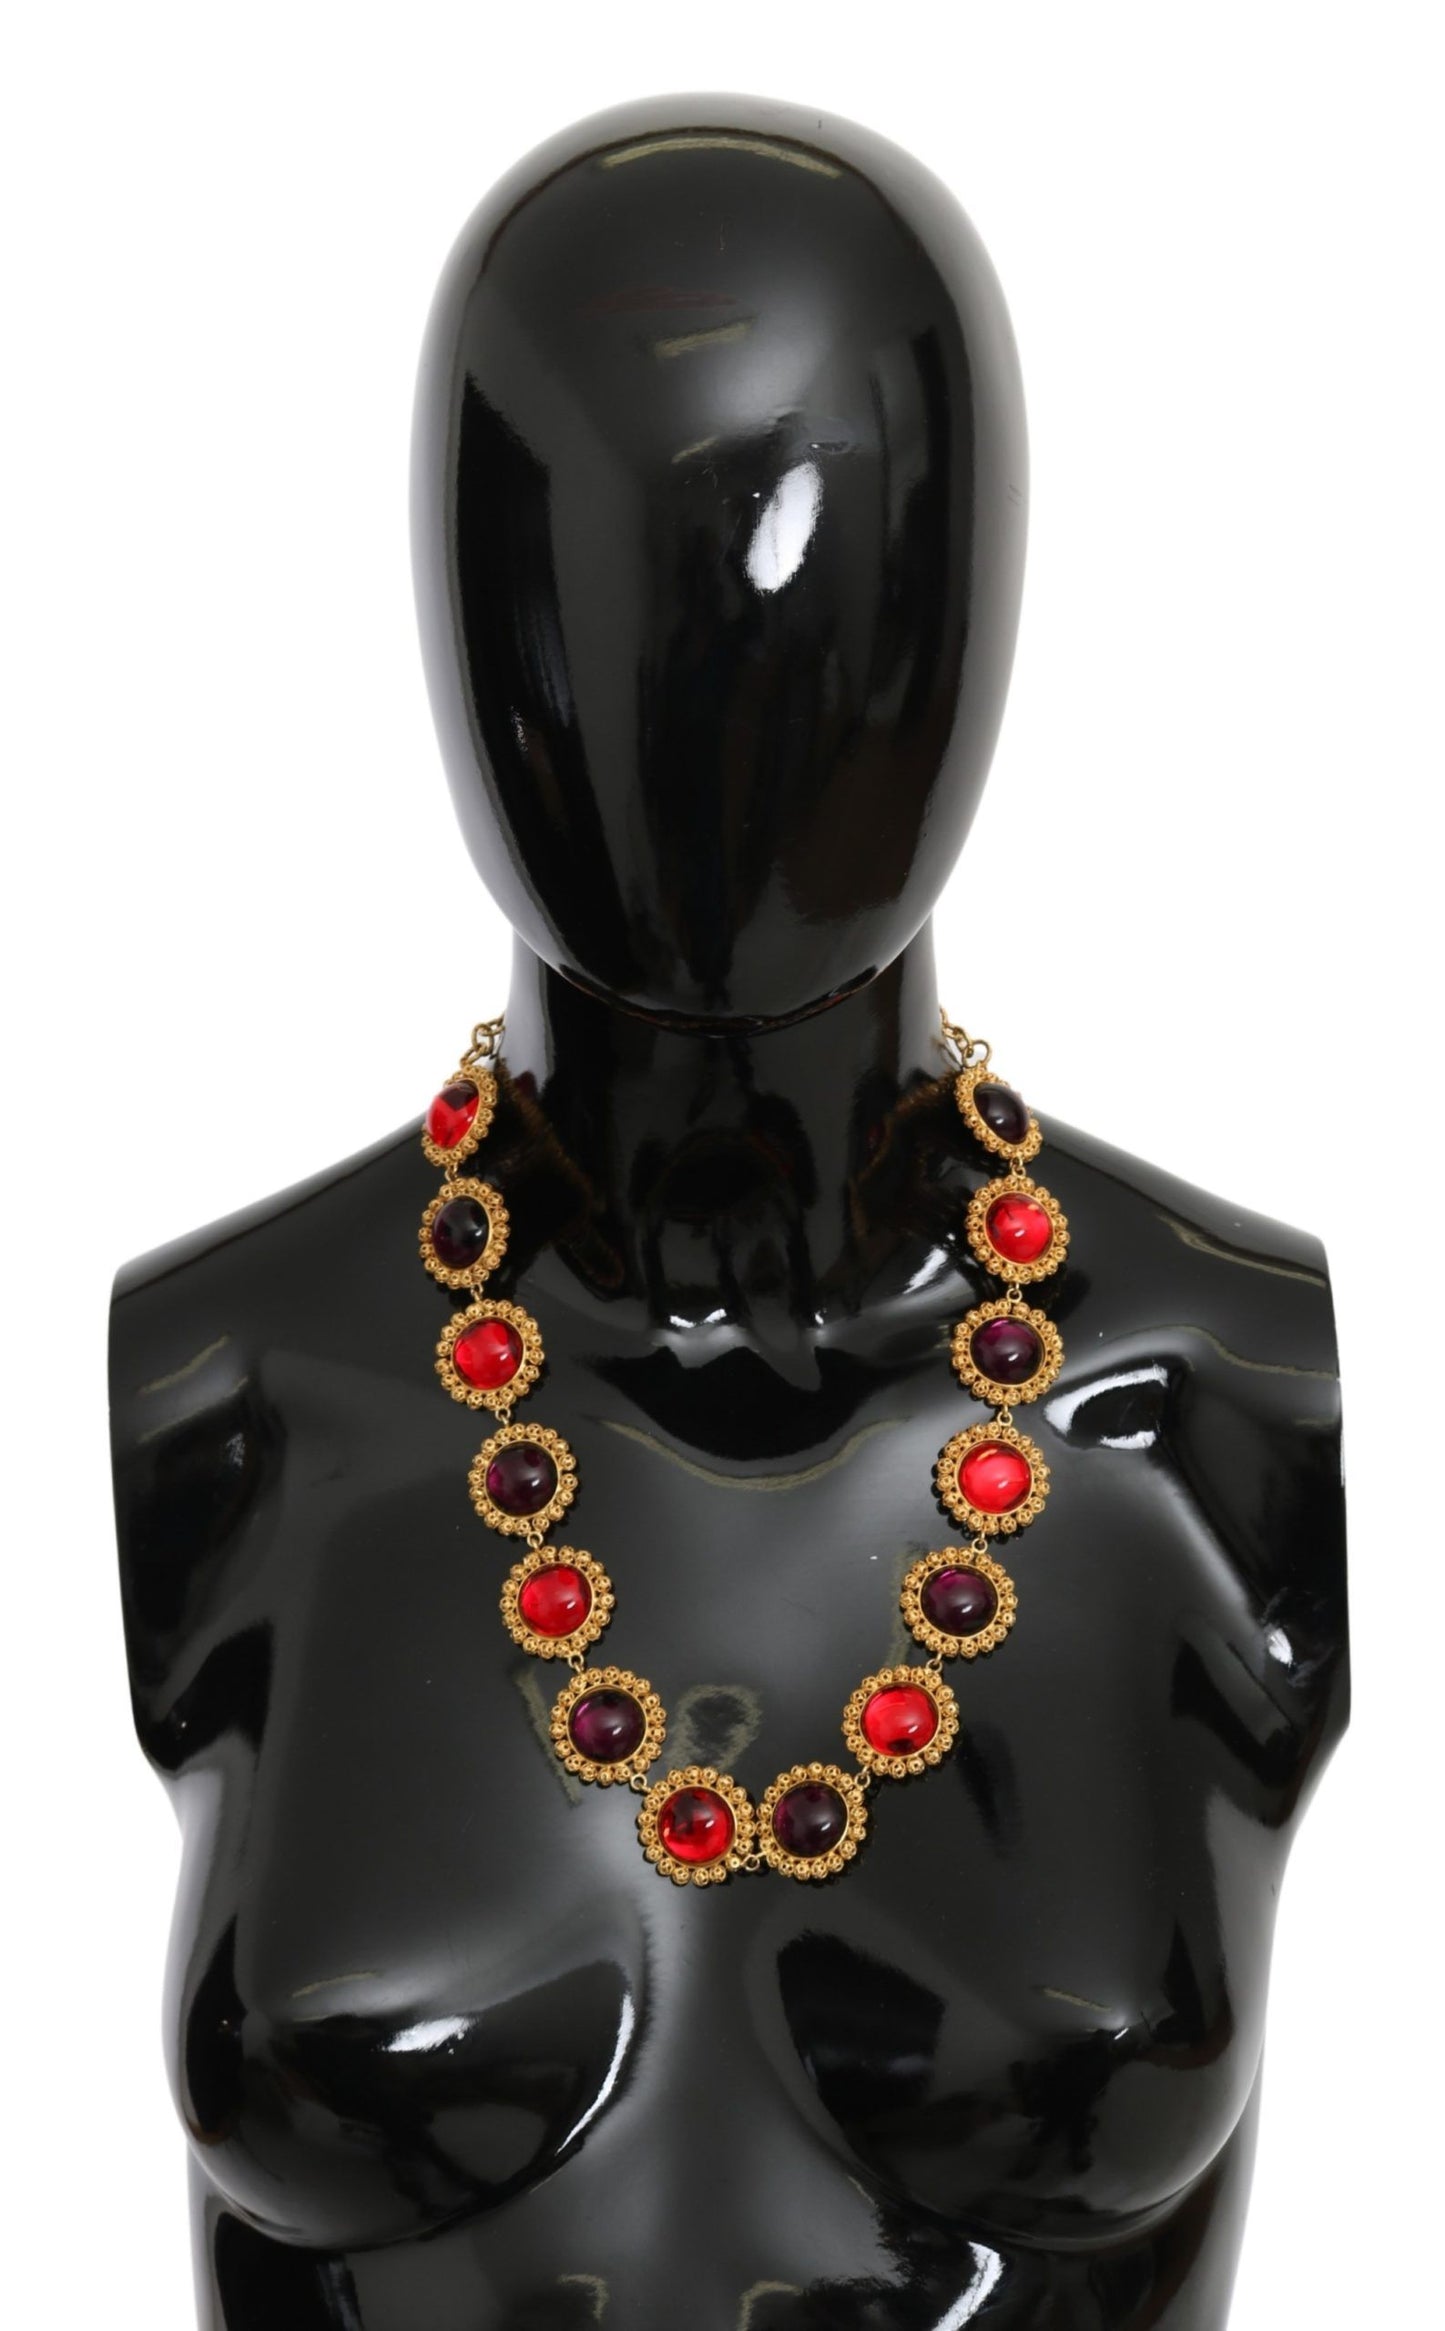 Red Purple Crystal Floral Chain Statement Gold Brass Necklace